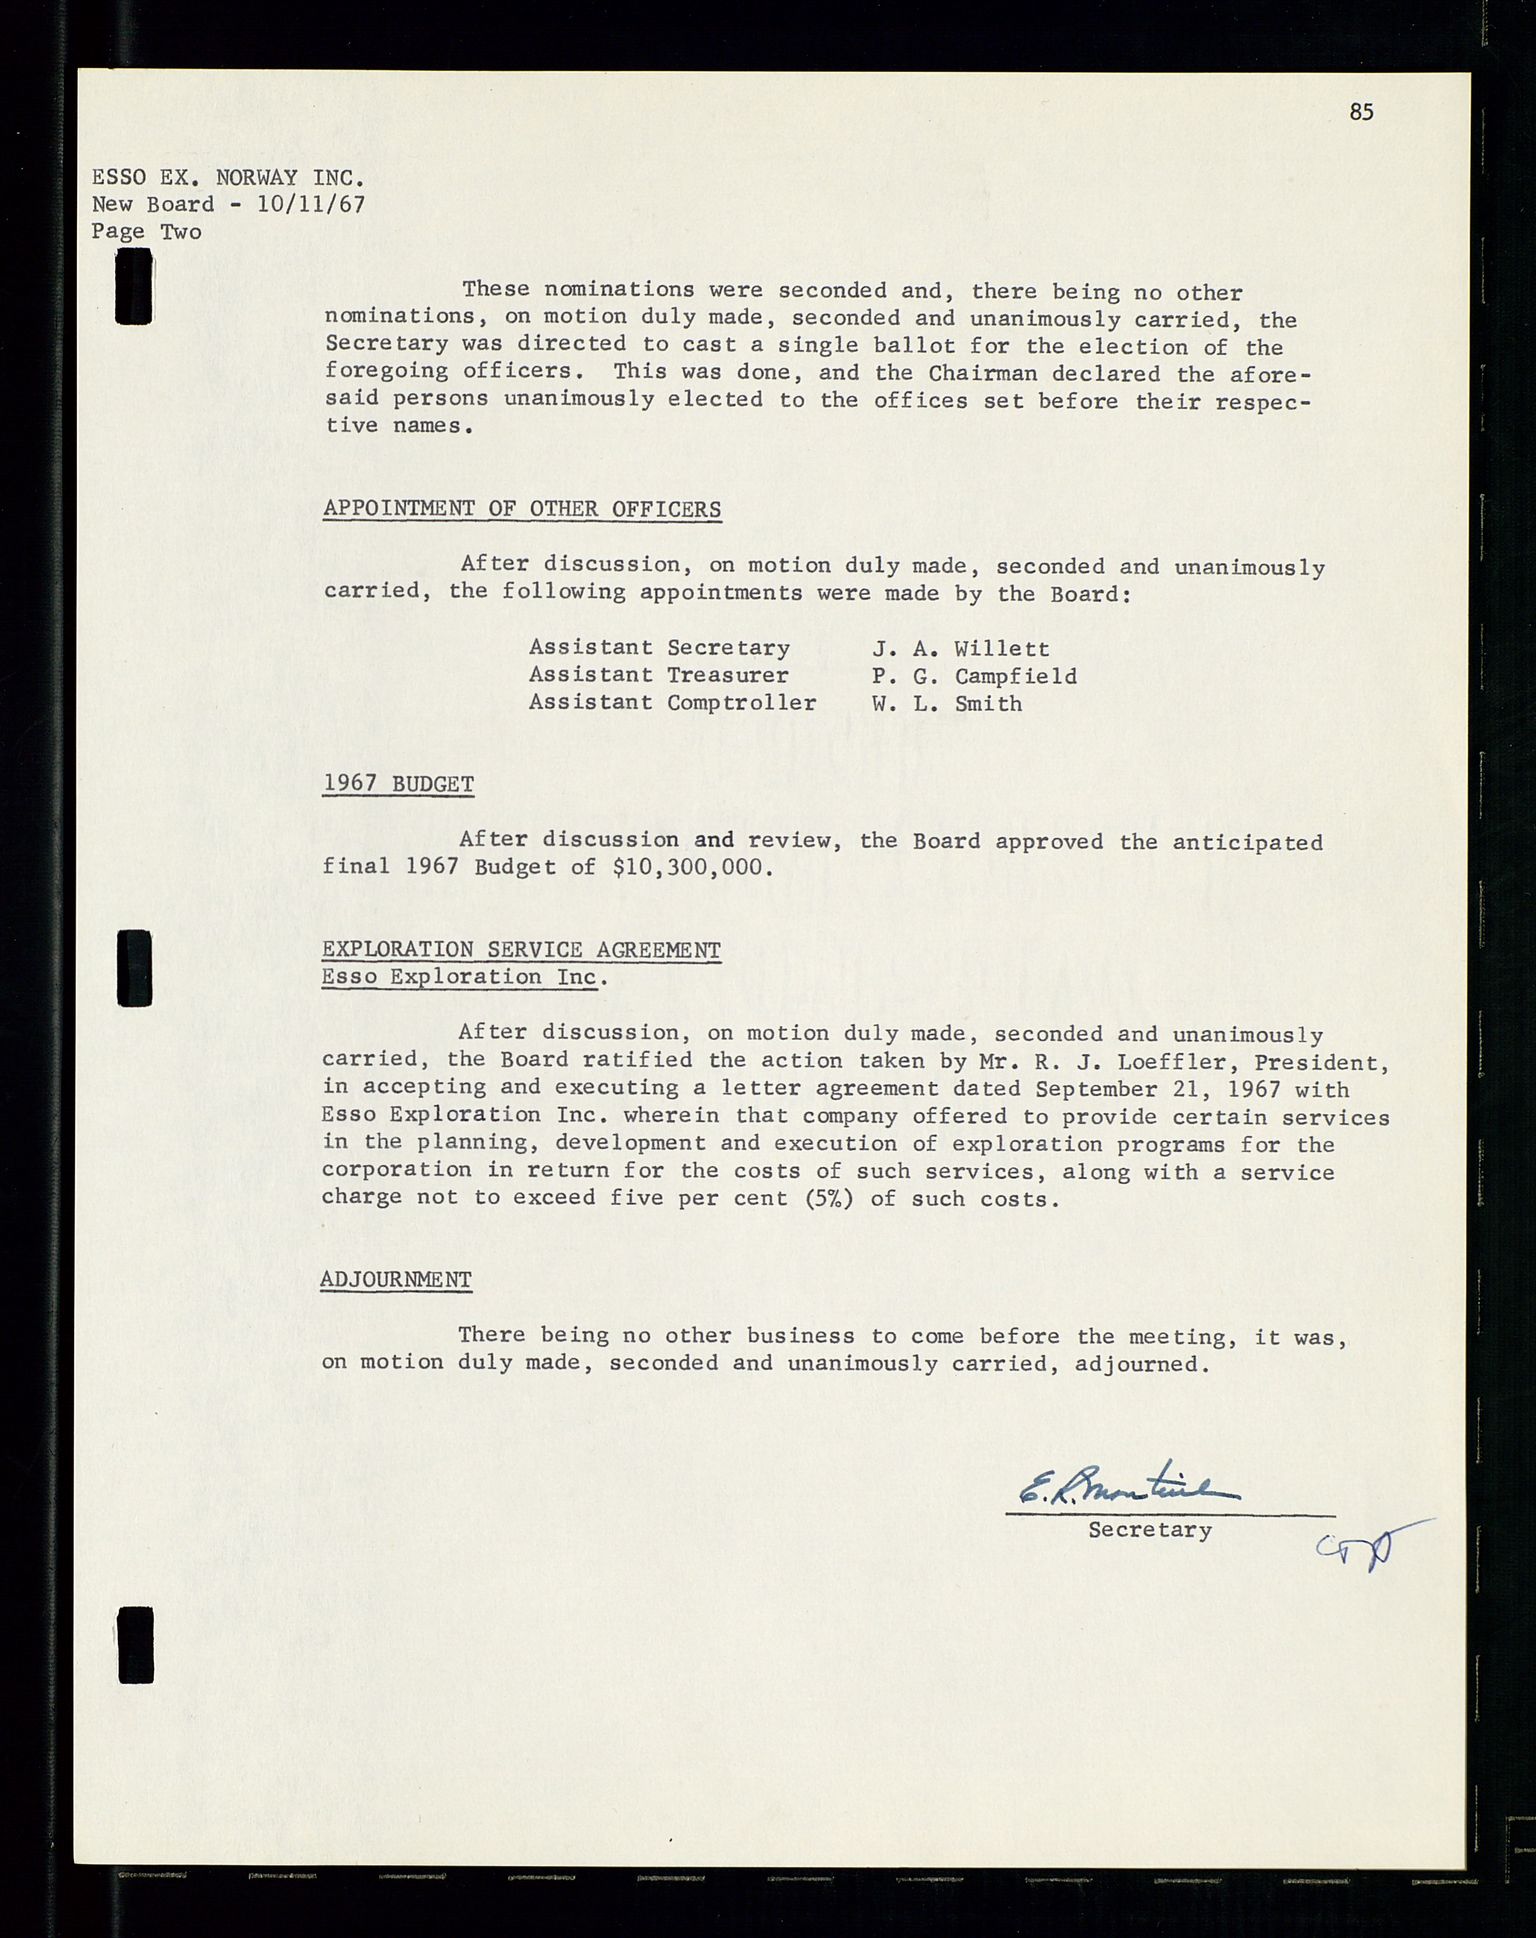 Pa 1512 - Esso Exploration and Production Norway Inc., SAST/A-101917/A/Aa/L0001/0001: Styredokumenter / Corporate records, By-Laws, Board meeting minutes, Incorporations, 1965-1975, p. 85